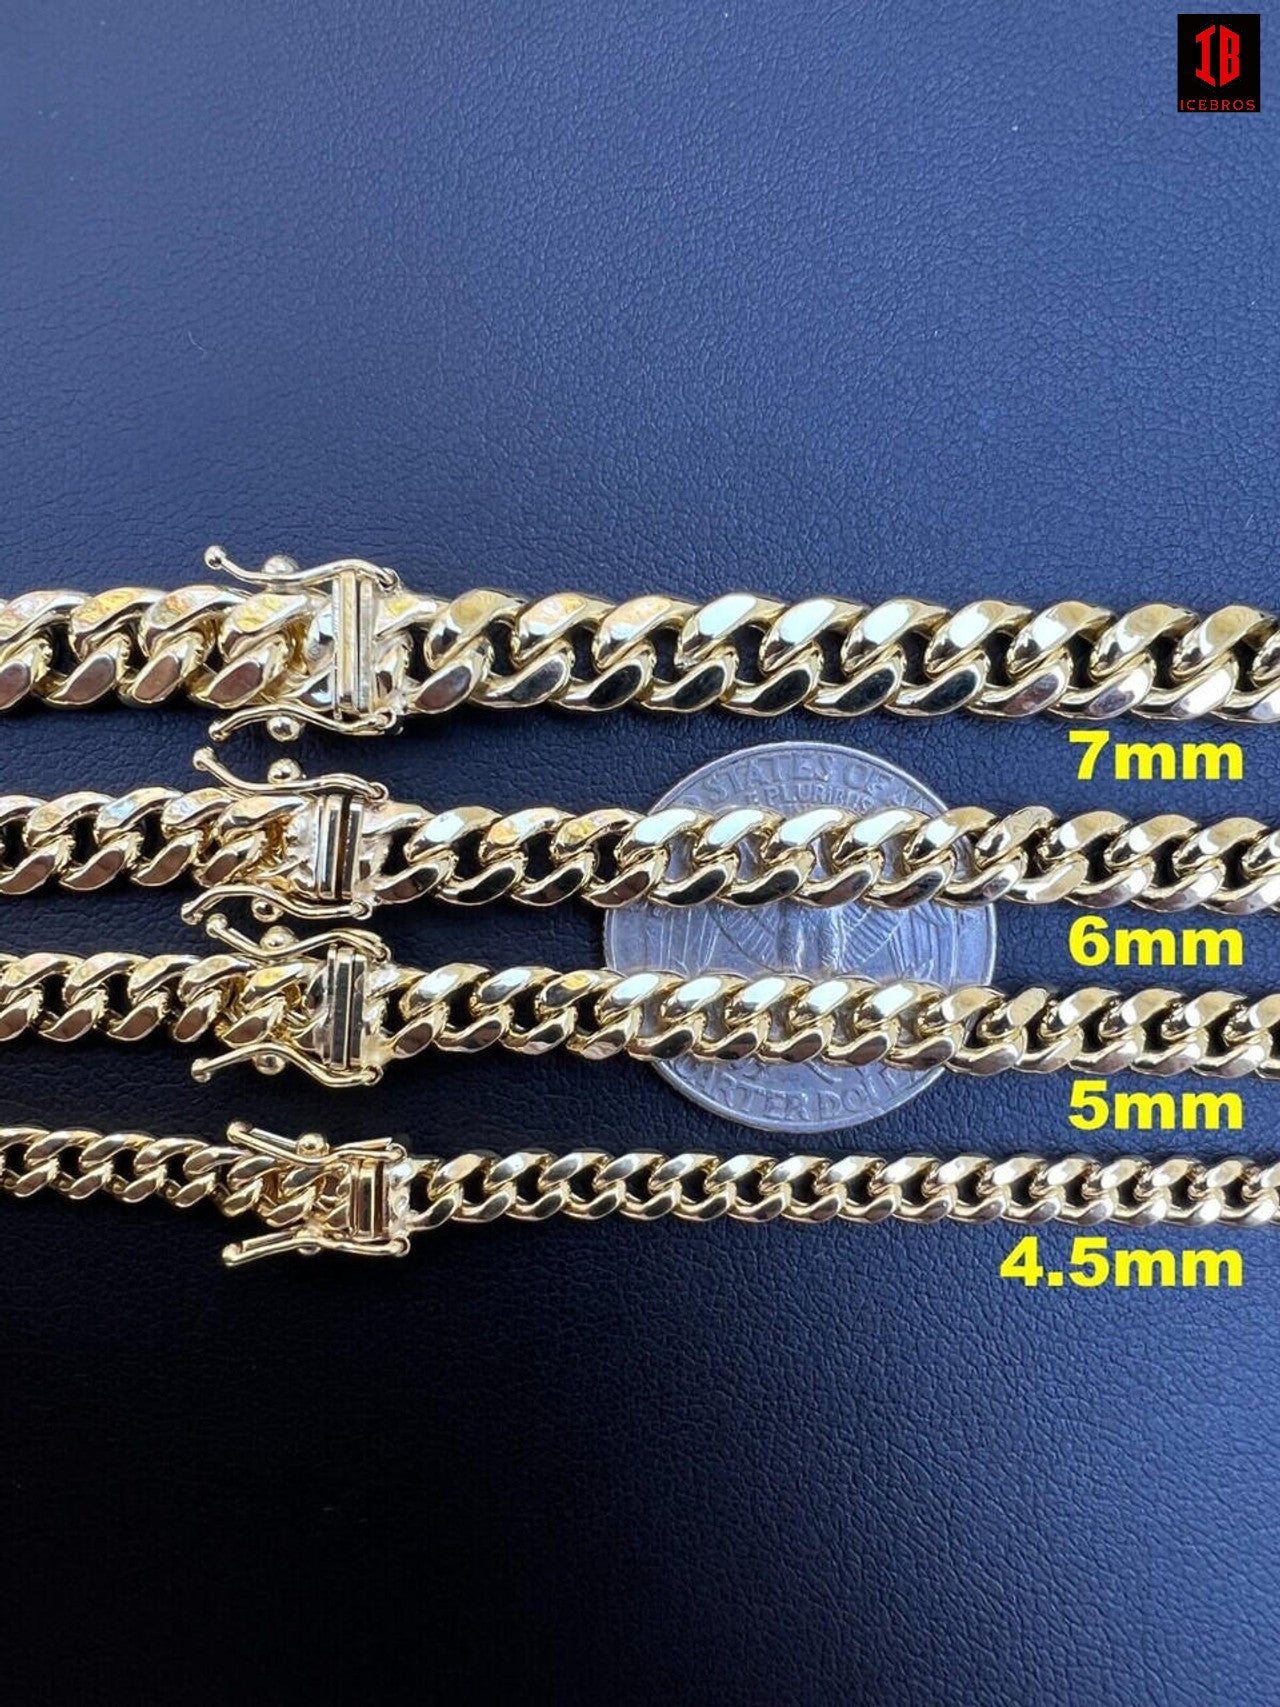 14k HOLLOW SOLID Yellow Gold Miami Cuban Link Chain Necklace 4.5-7mm 18-26" Box Lock